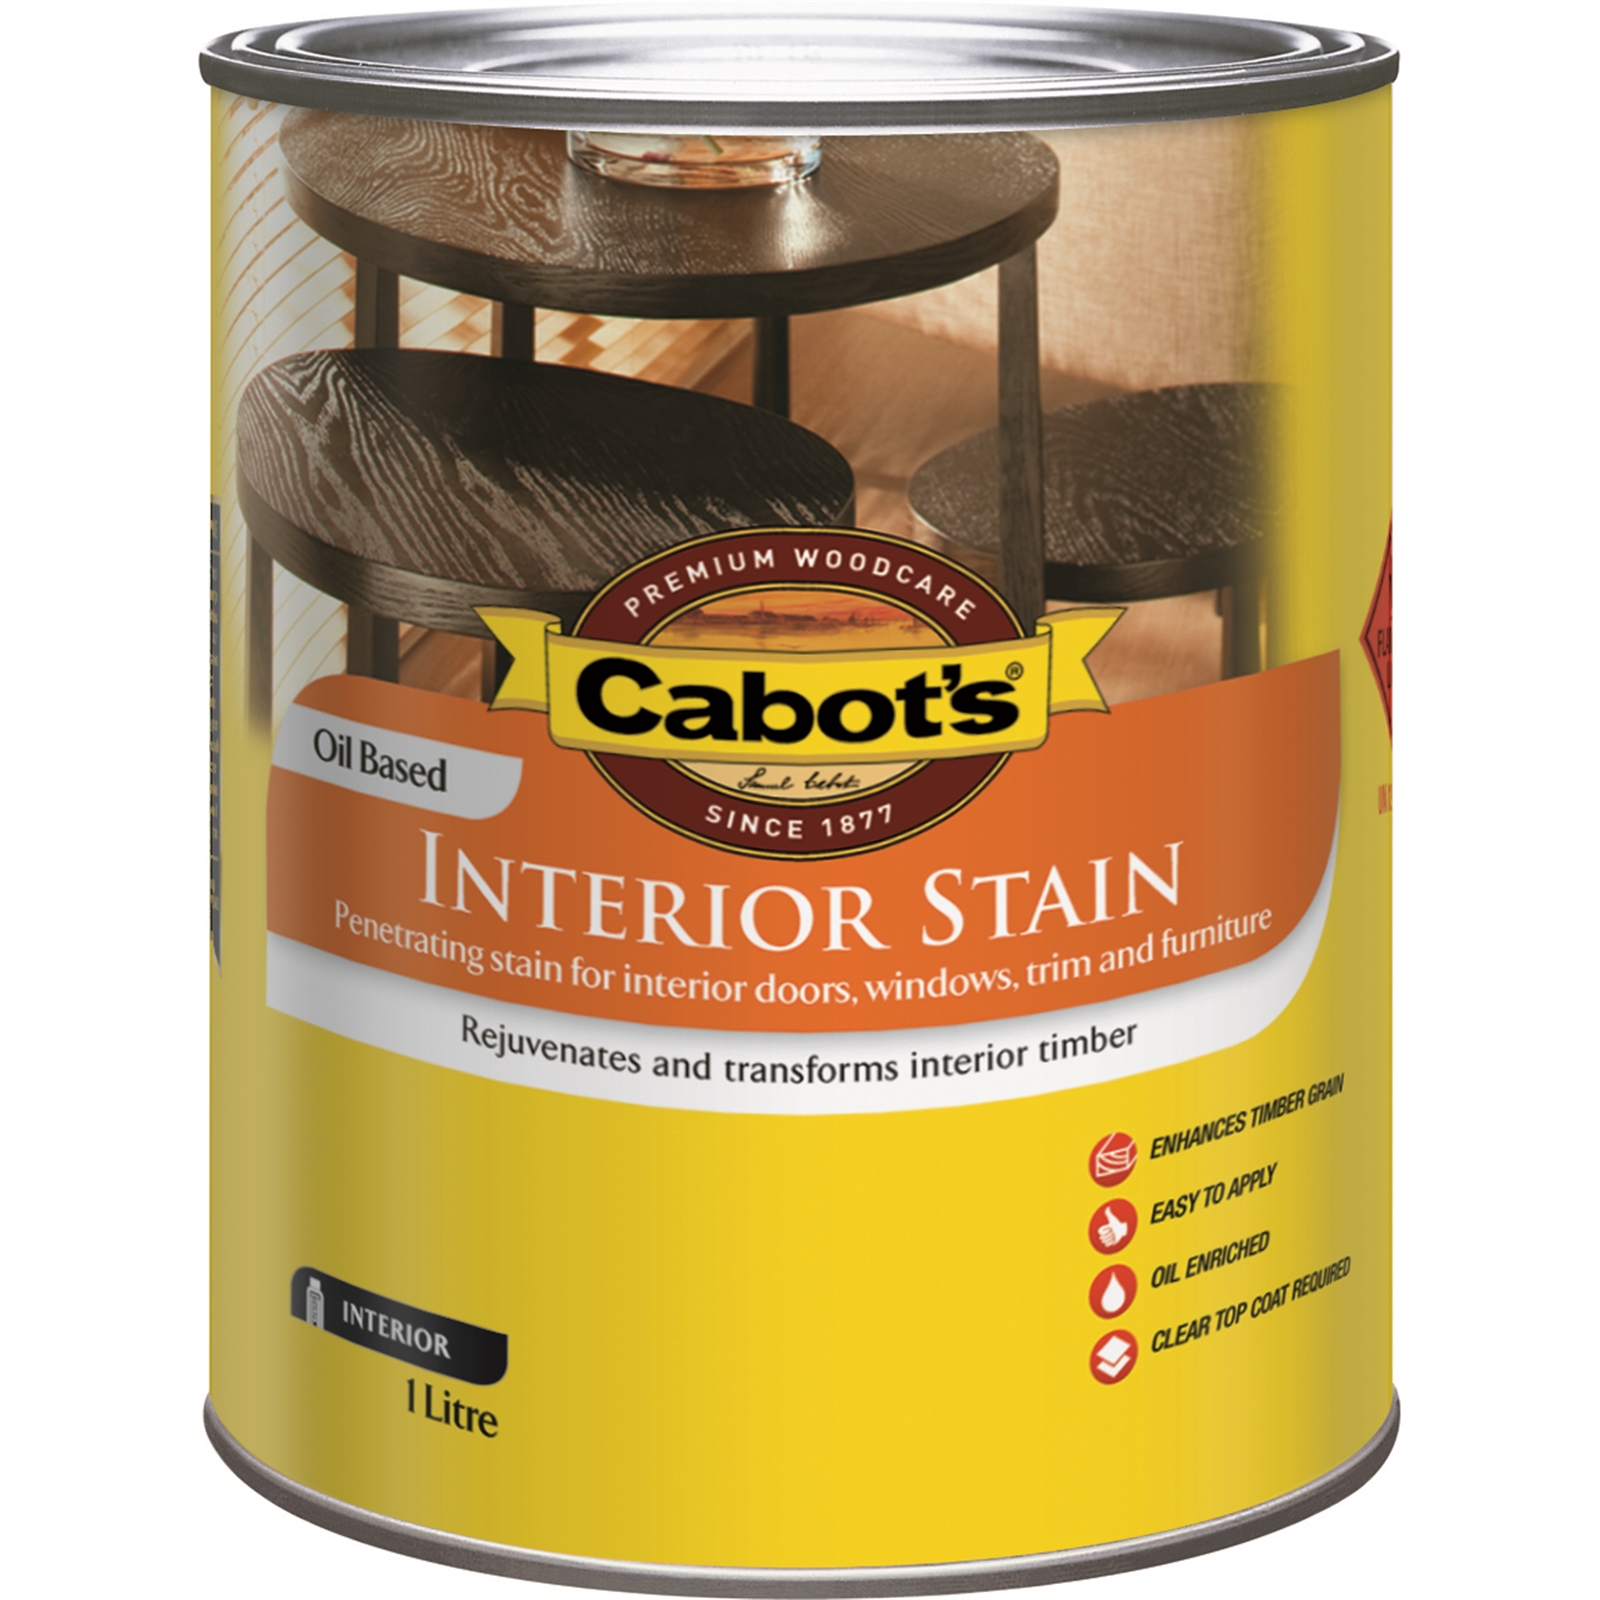 Cabot's 1L Maple Interior Stain